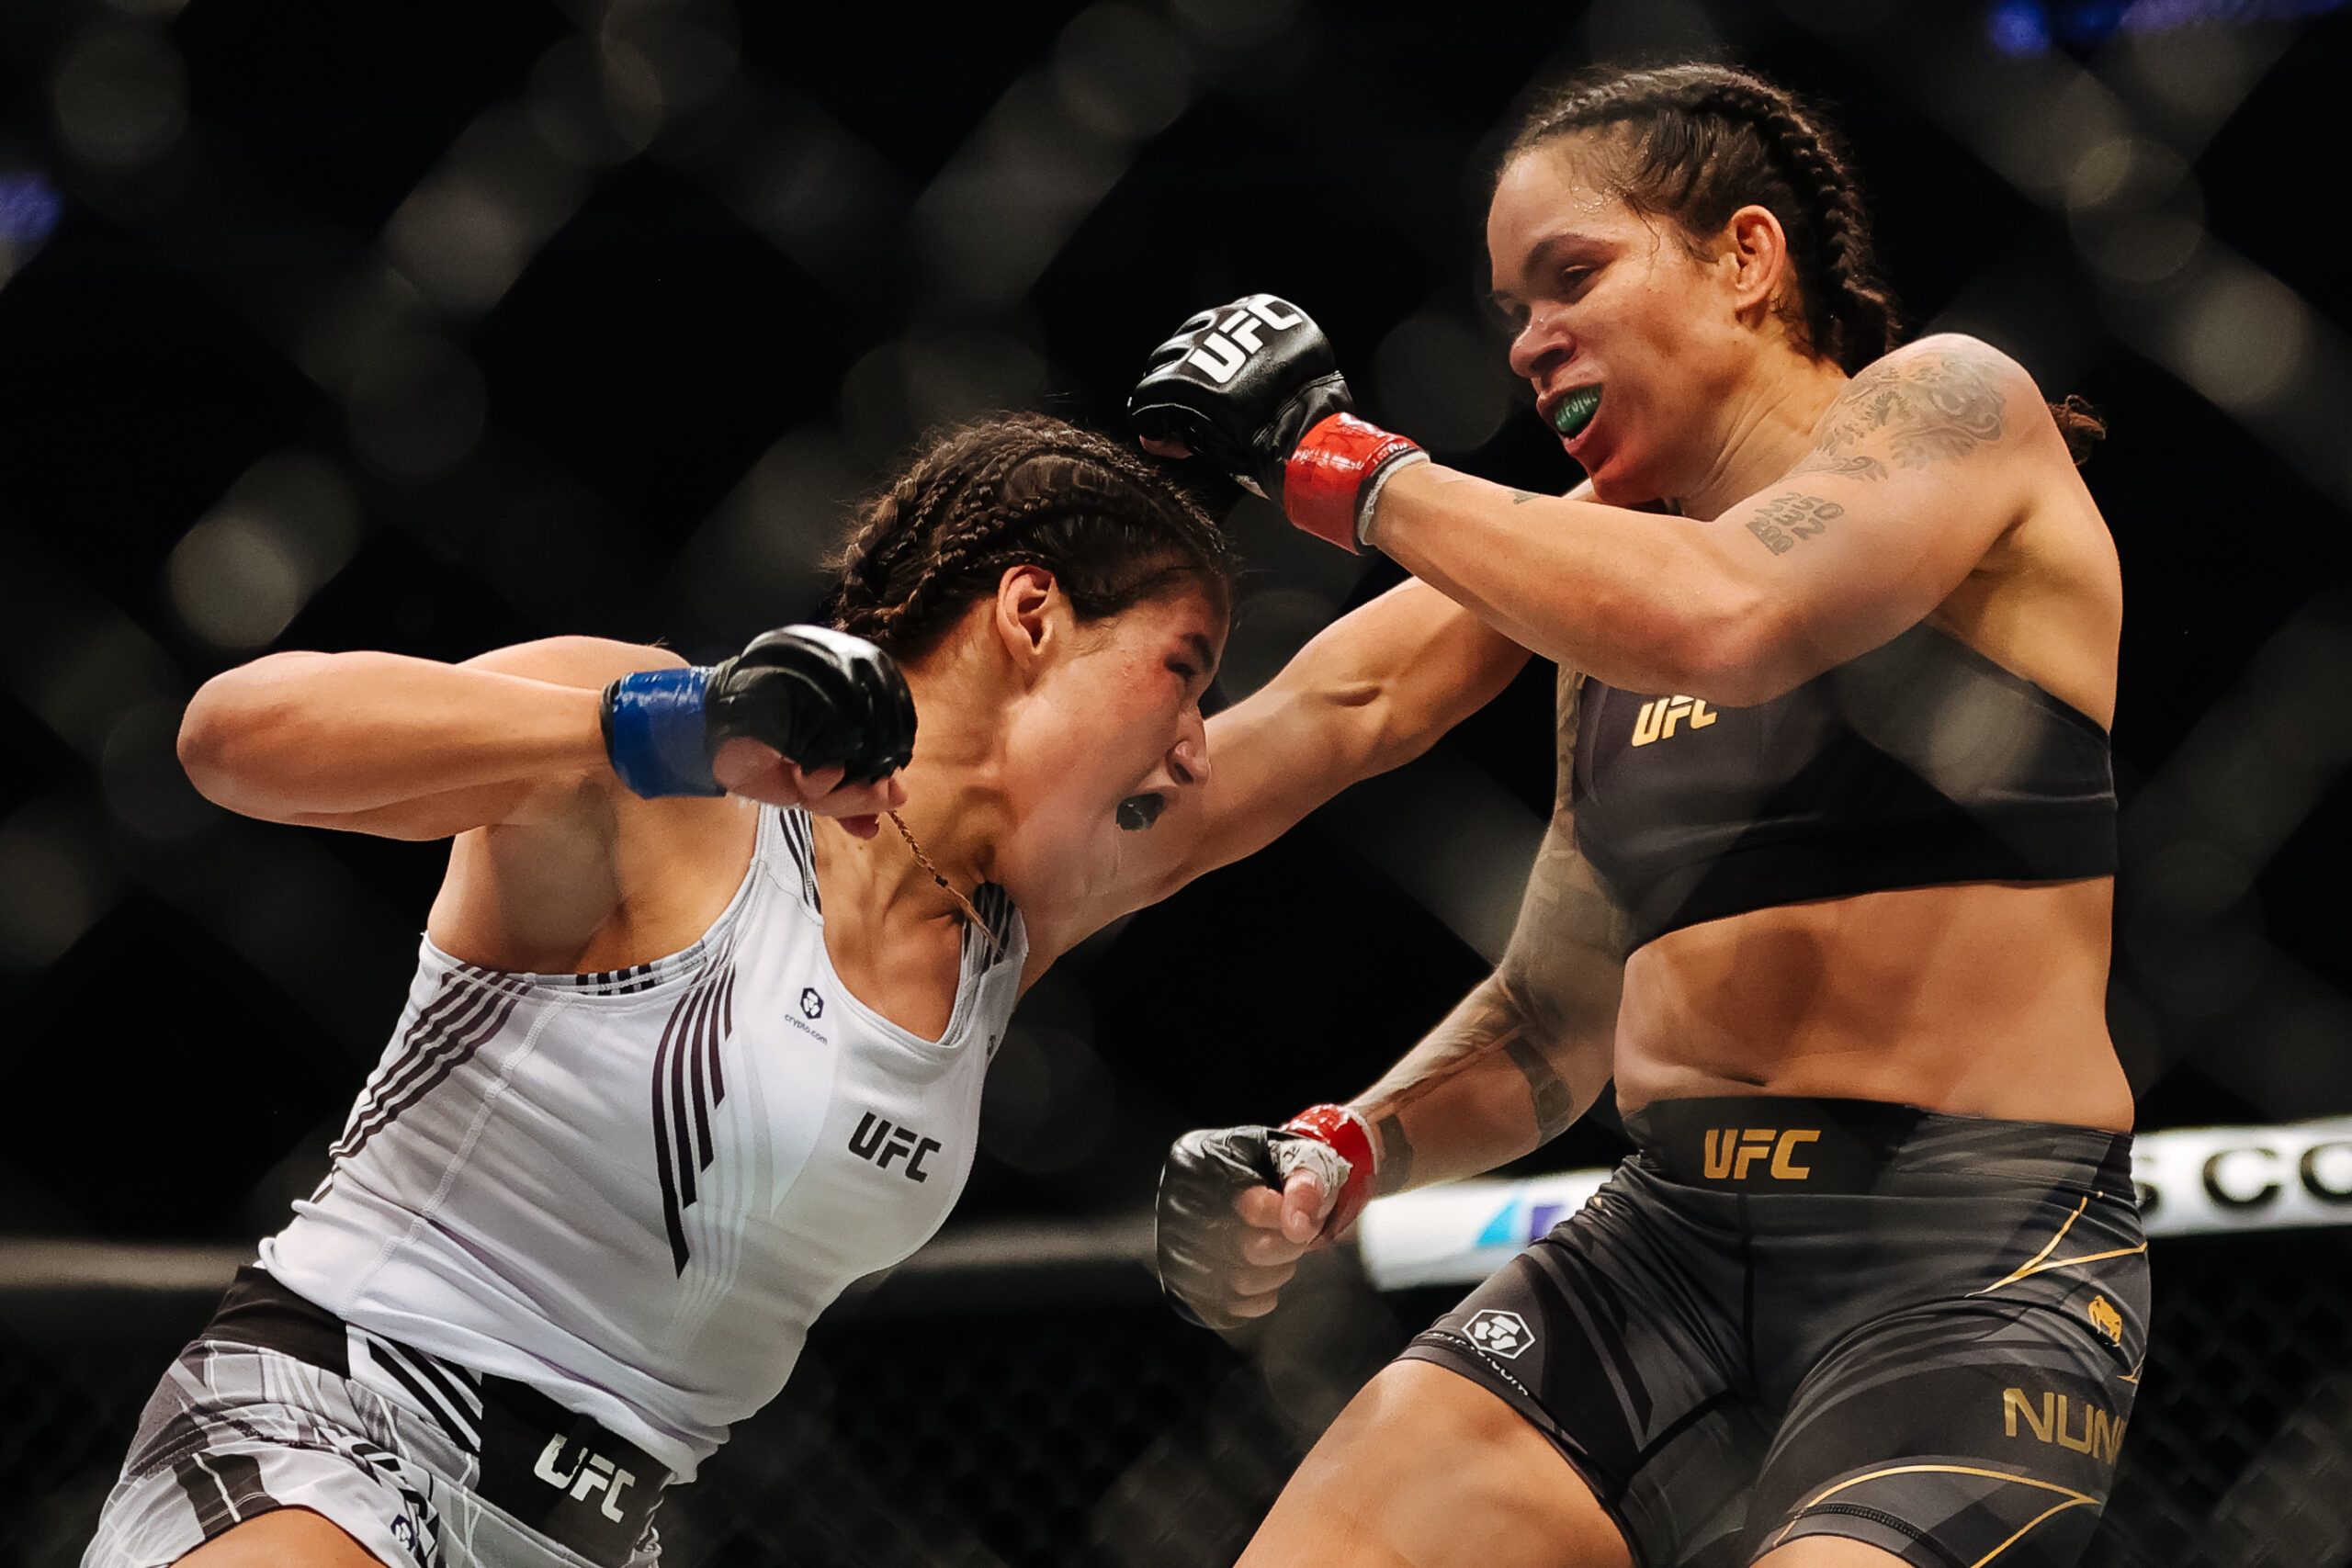 UFC 277: Julianna Pena doesn’t want to be a 'sex sells' fighter.